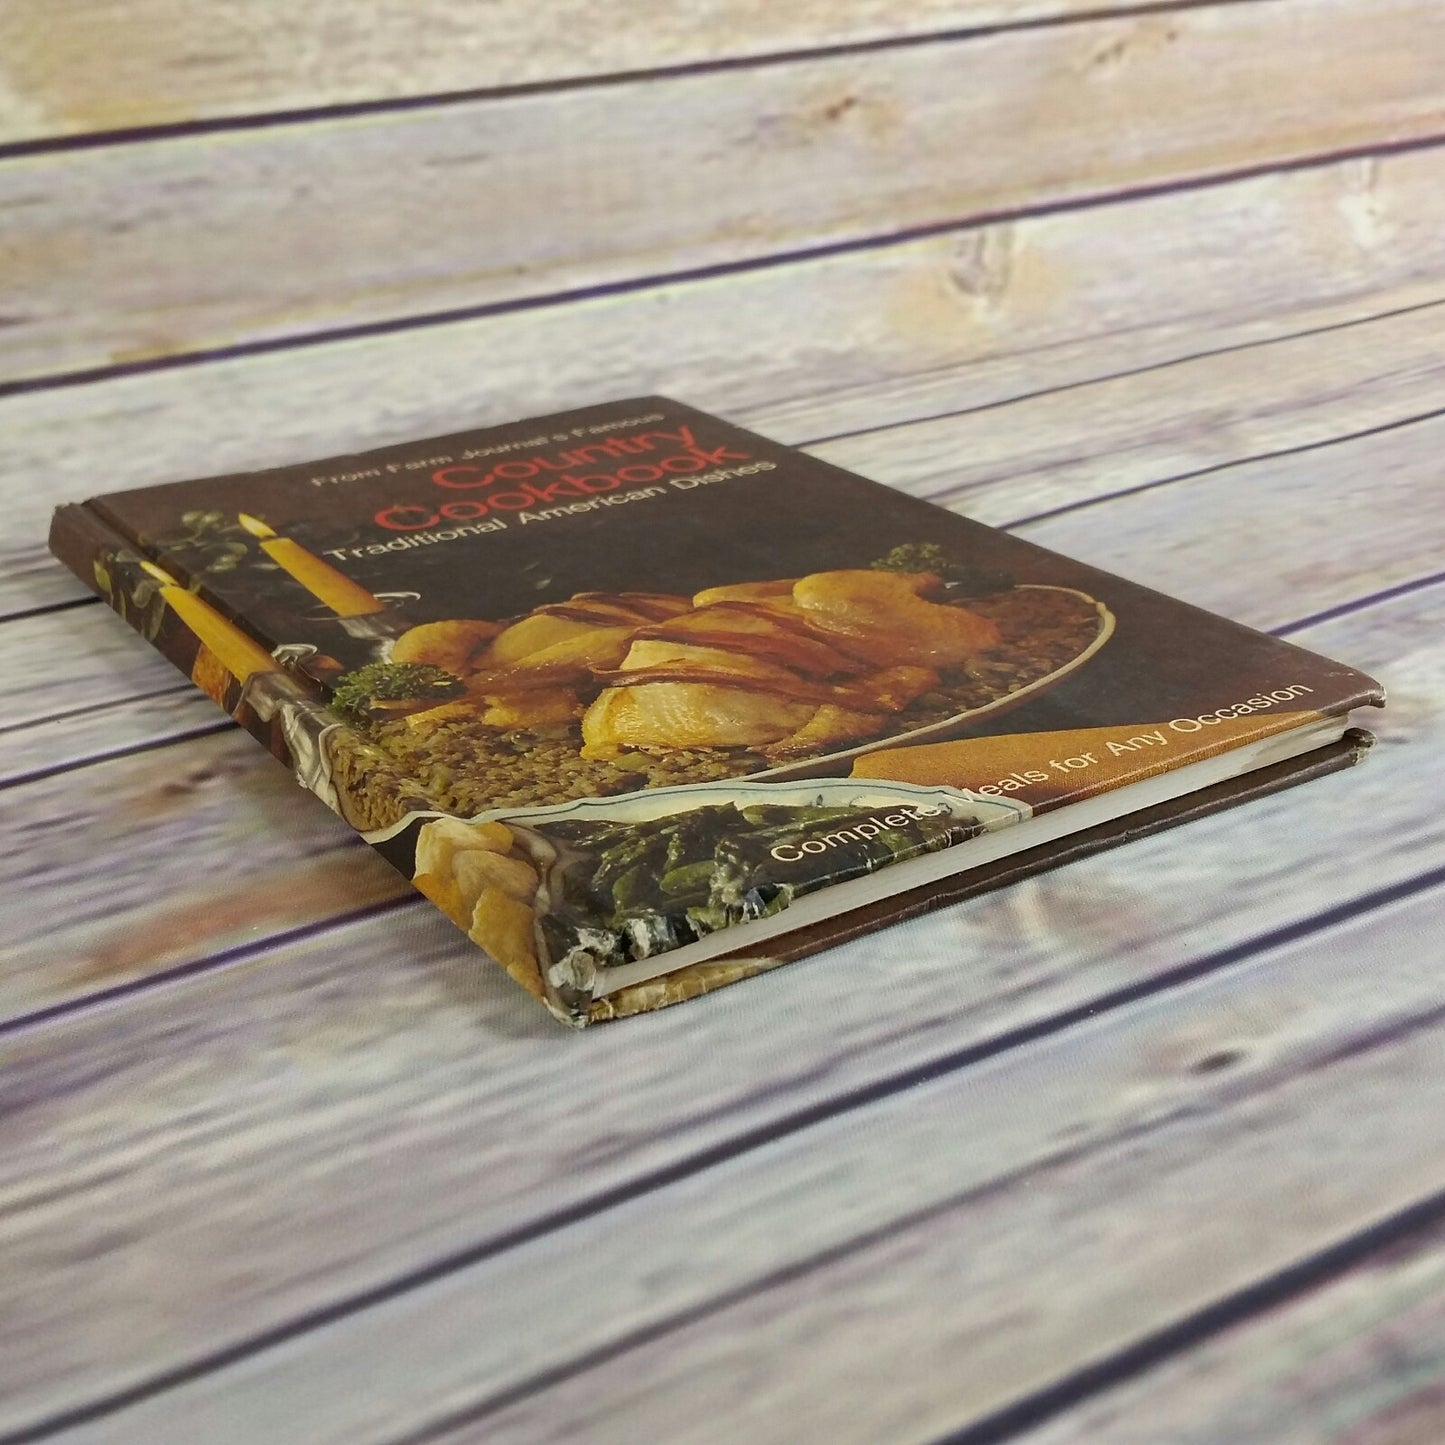 Vintage Farm Journal Famous Country Cookbook 1971 NO Dust Jacket Hardcover Traditional American Dishes - At Grandma's Table